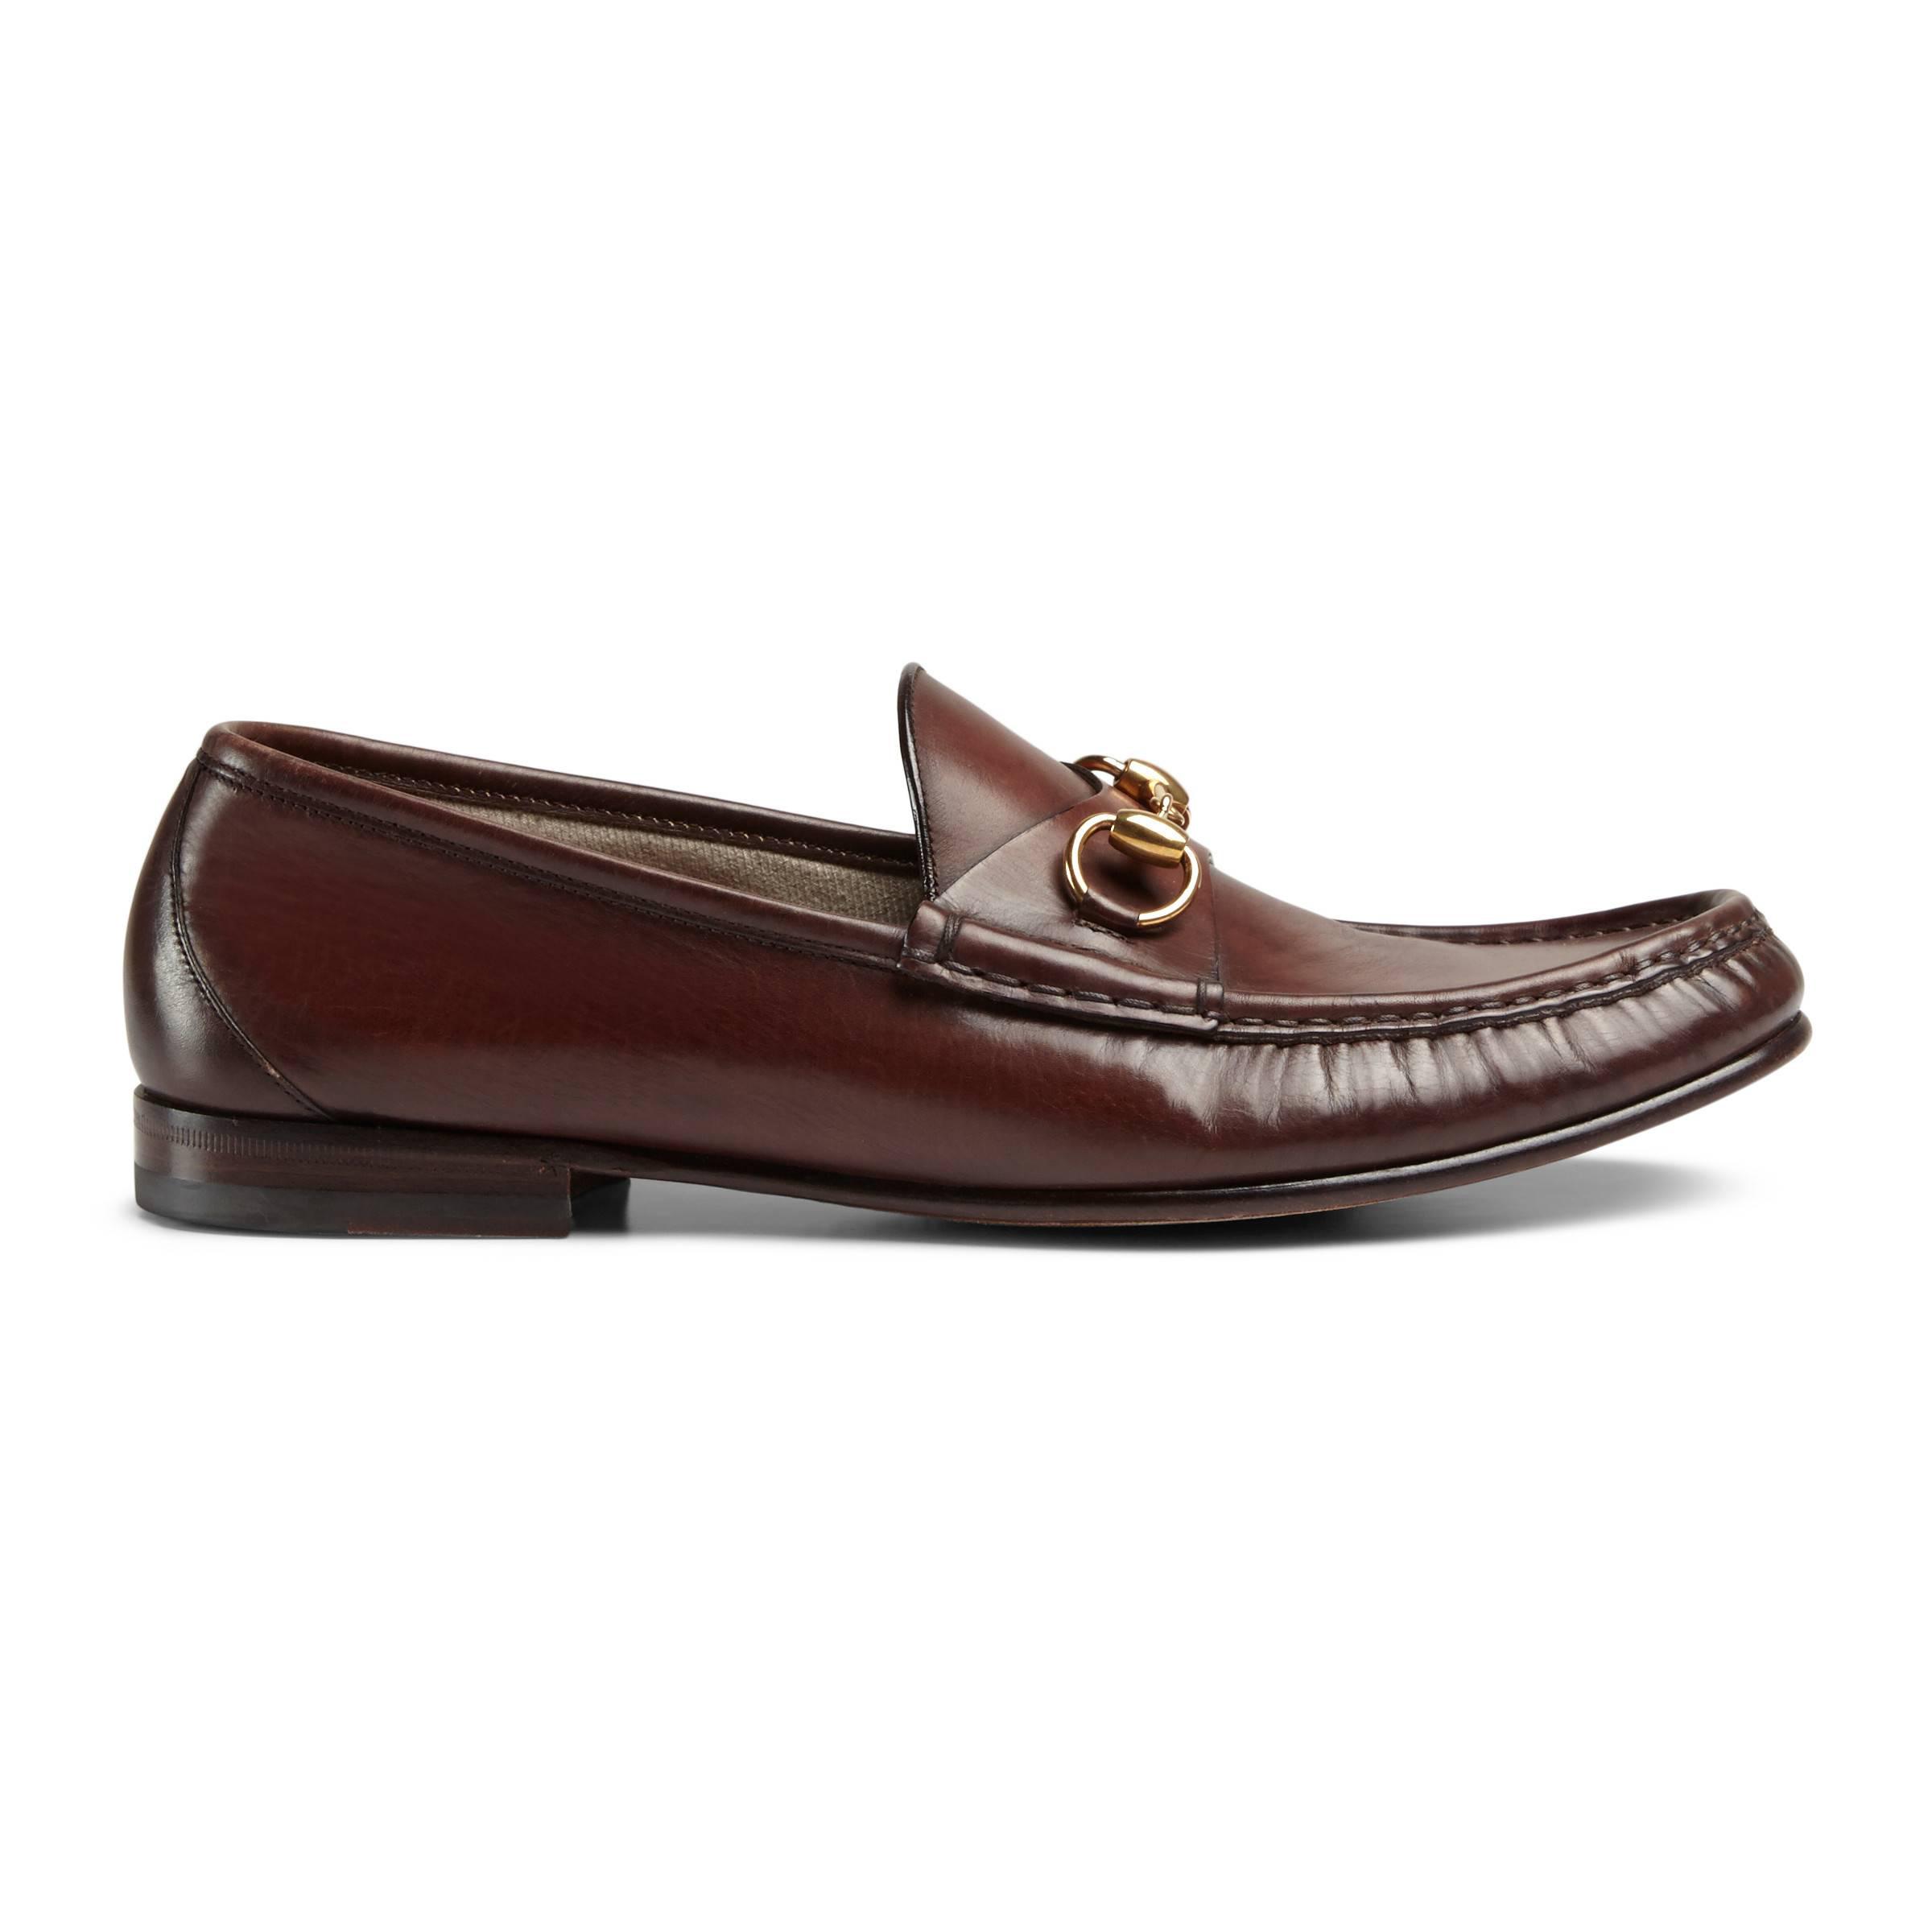 Gucci 1953 Horsebit Loafer In Leather in Brown for Men - Save 24% - Lyst